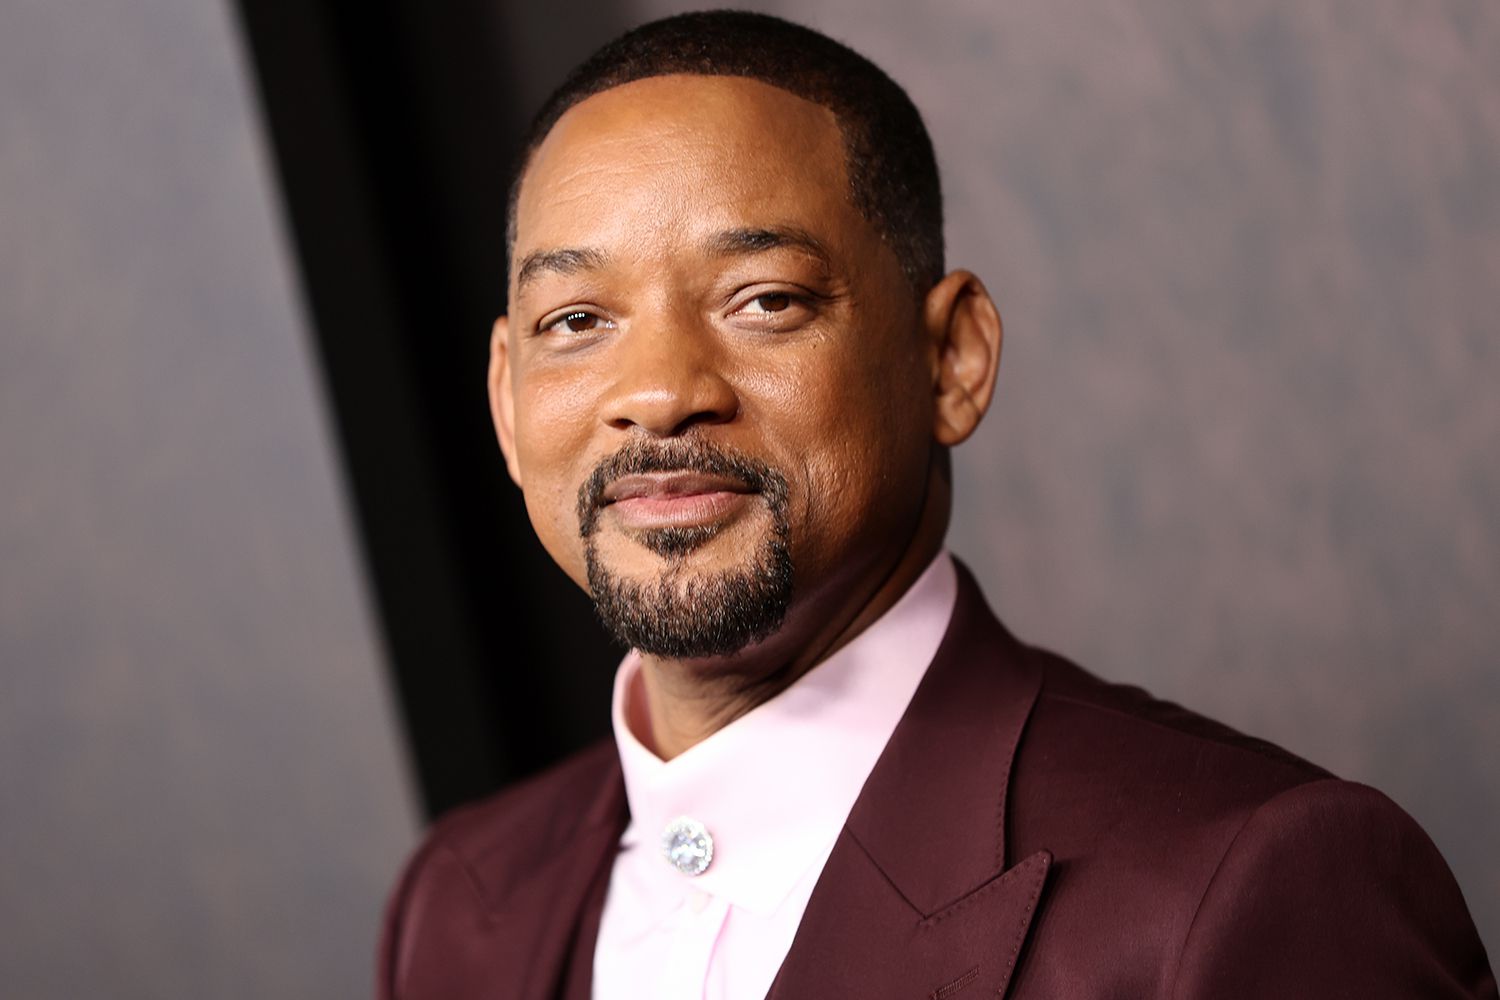 celebrities who fell from grace - will smith - Minima